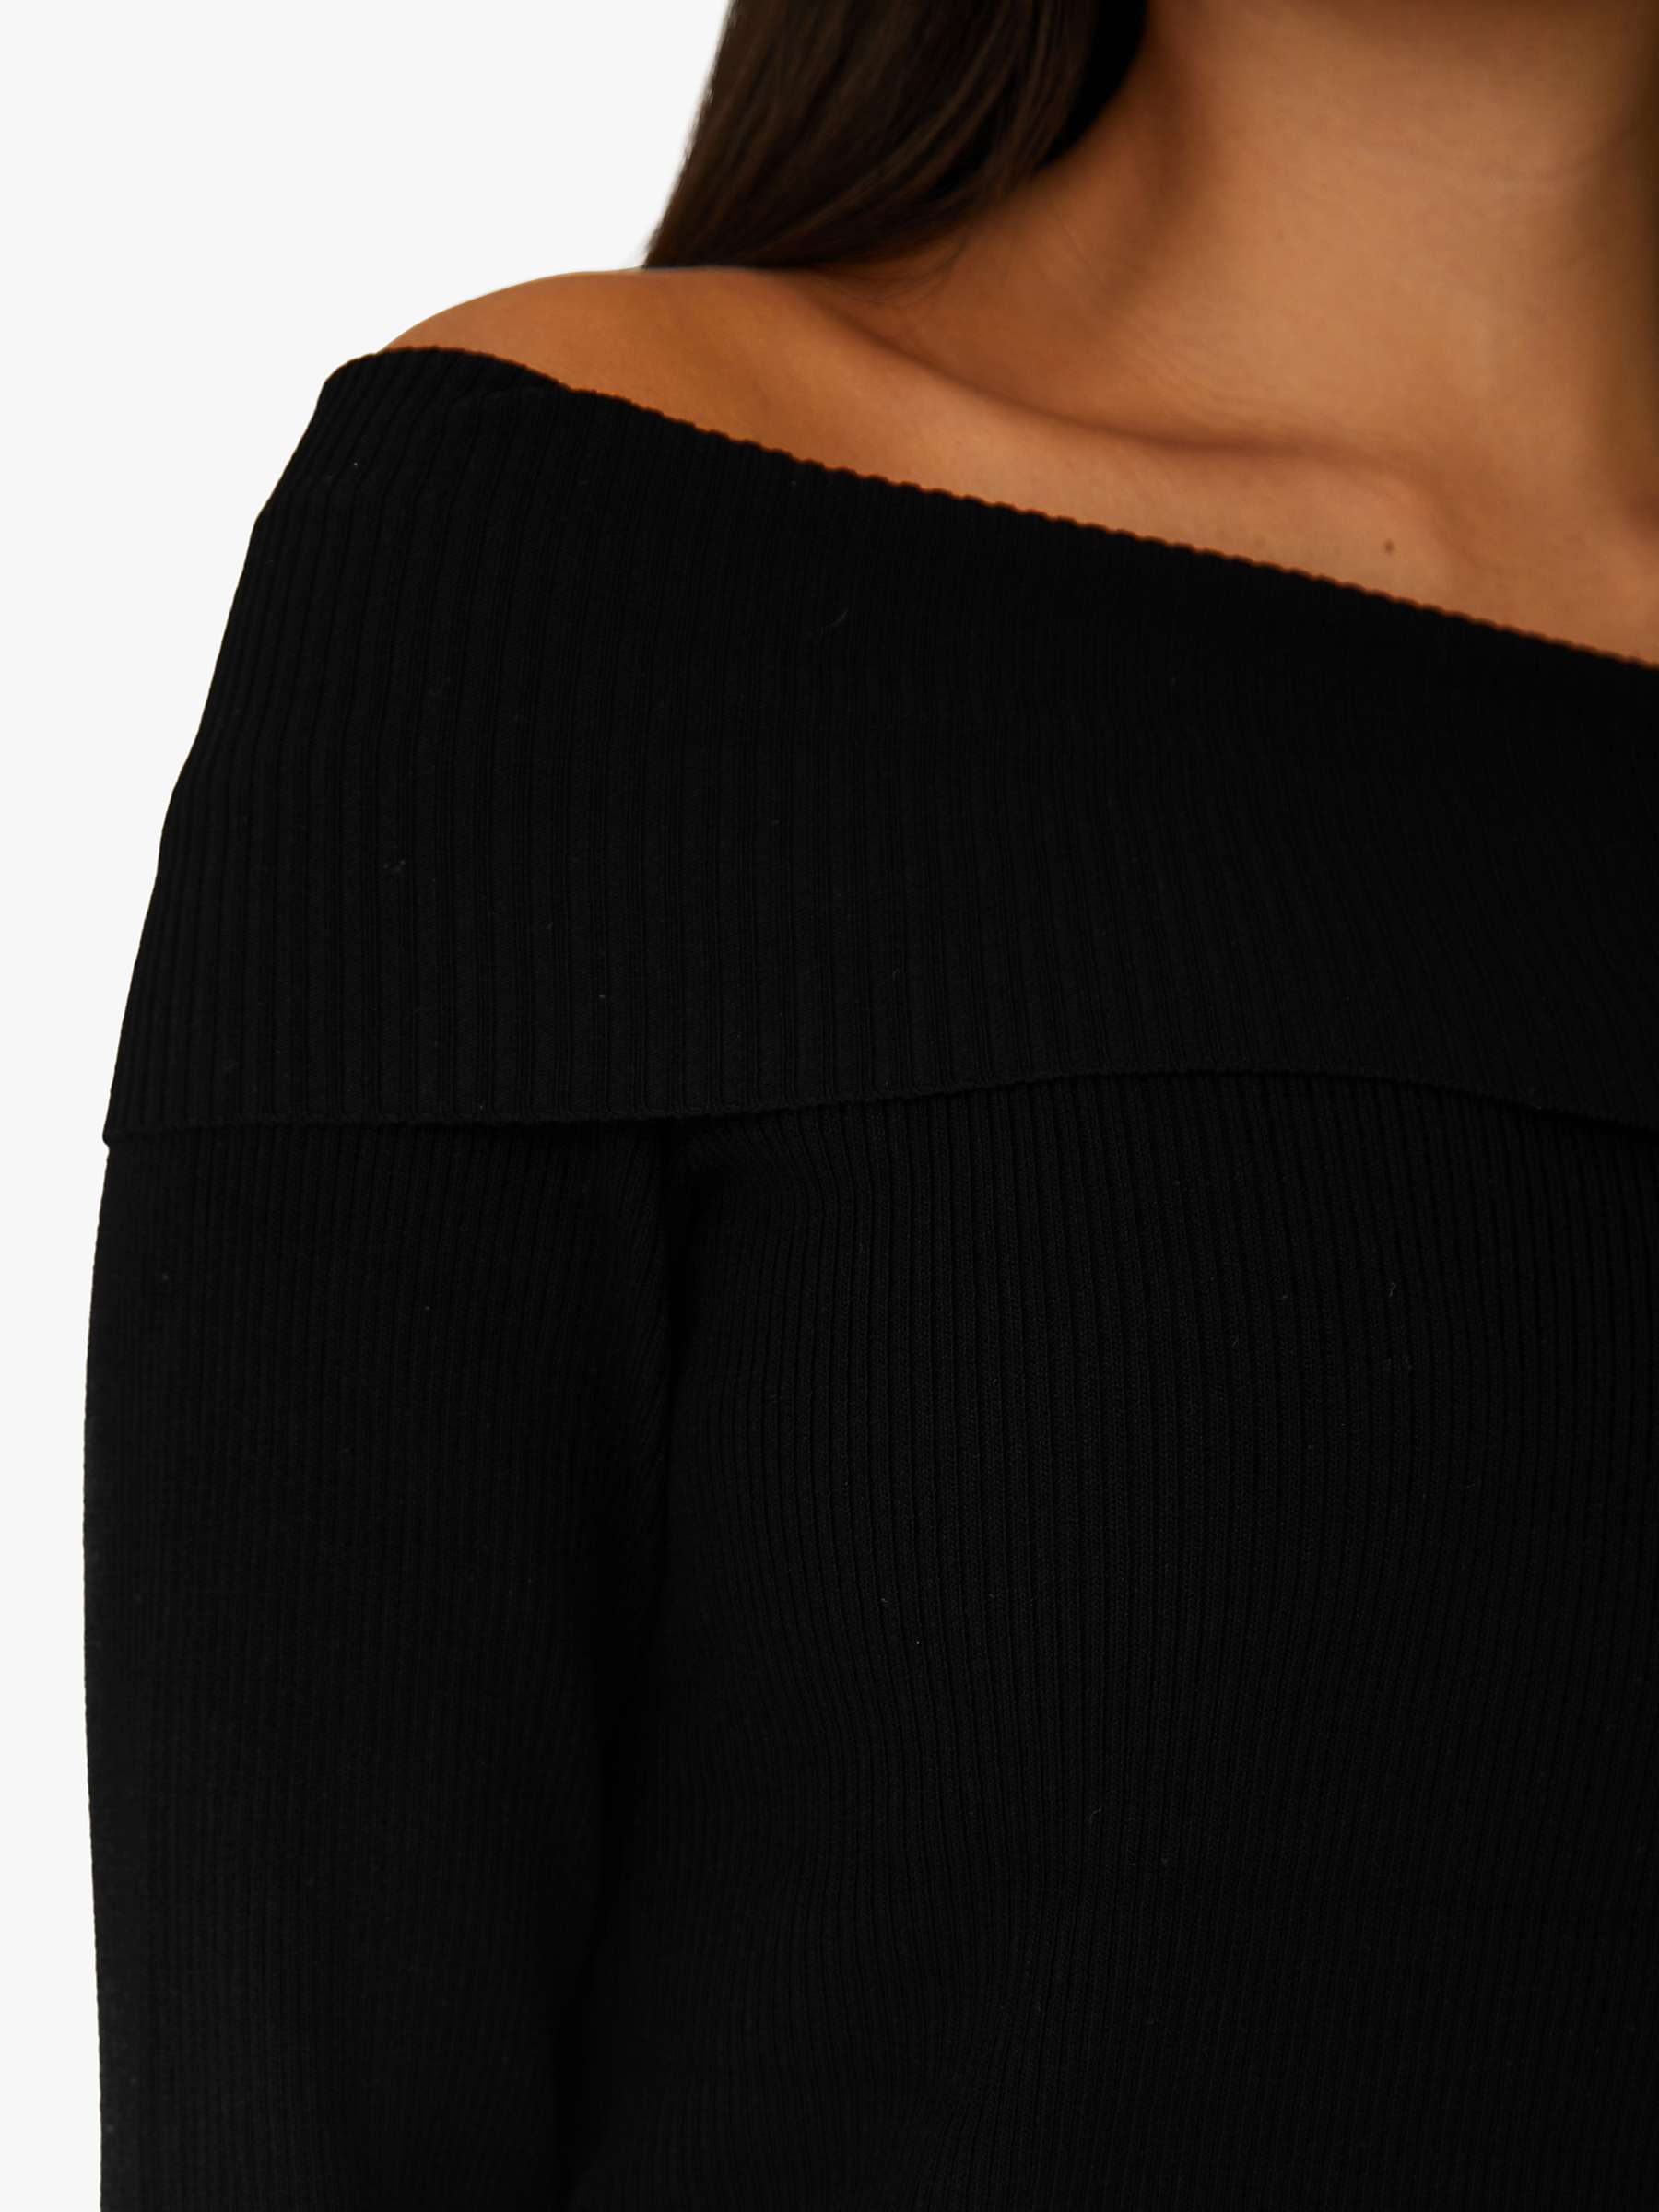 Buy A-VIEW Ribbed Bardot Blouse Online at johnlewis.com